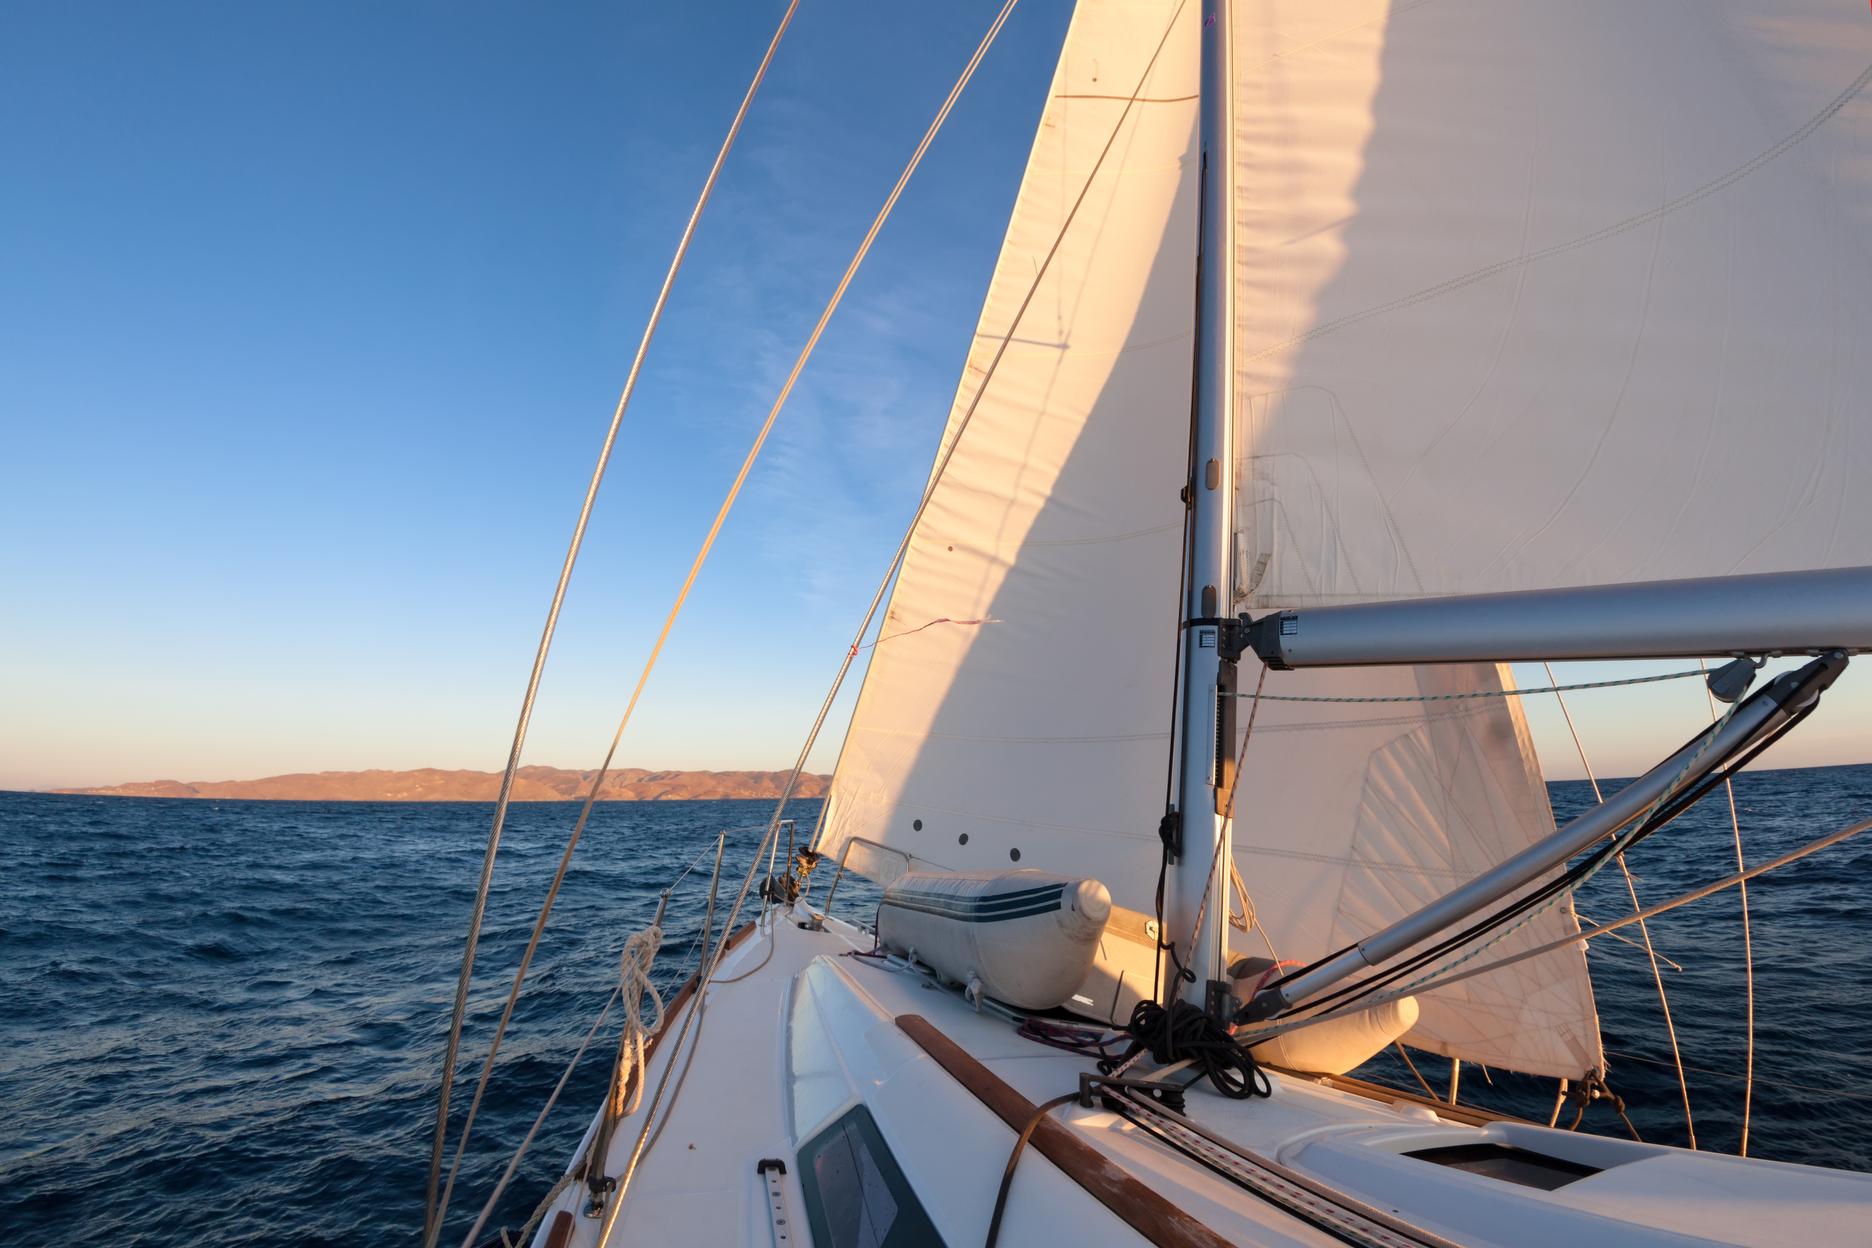 How To Sail A Boat - Lessons in Sailing